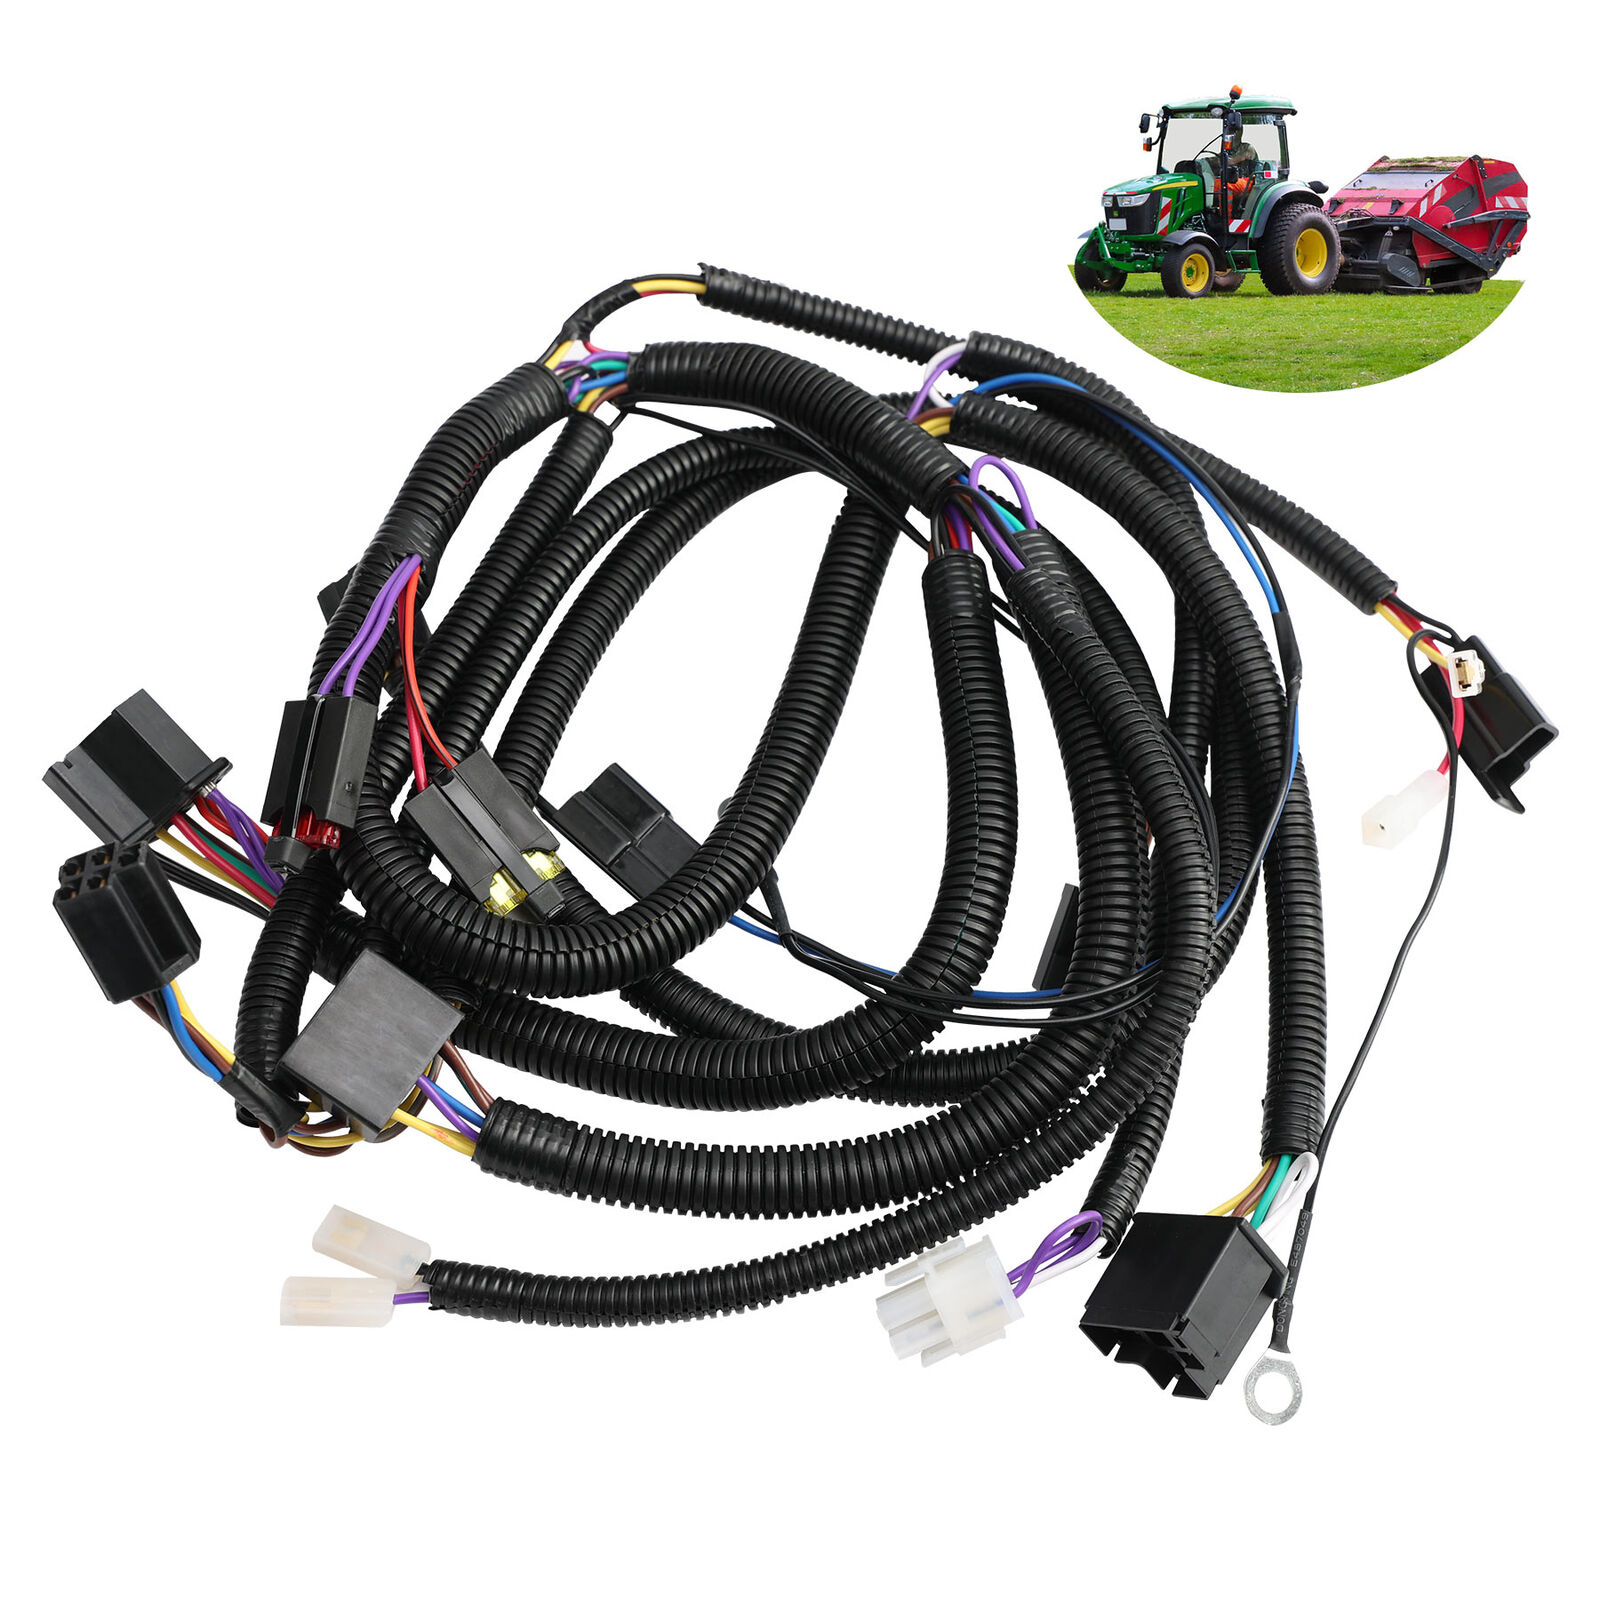 580798101 Lawn Tractor Wire Harness Fit for Husqvarna Craftsman Poulan Jonsered